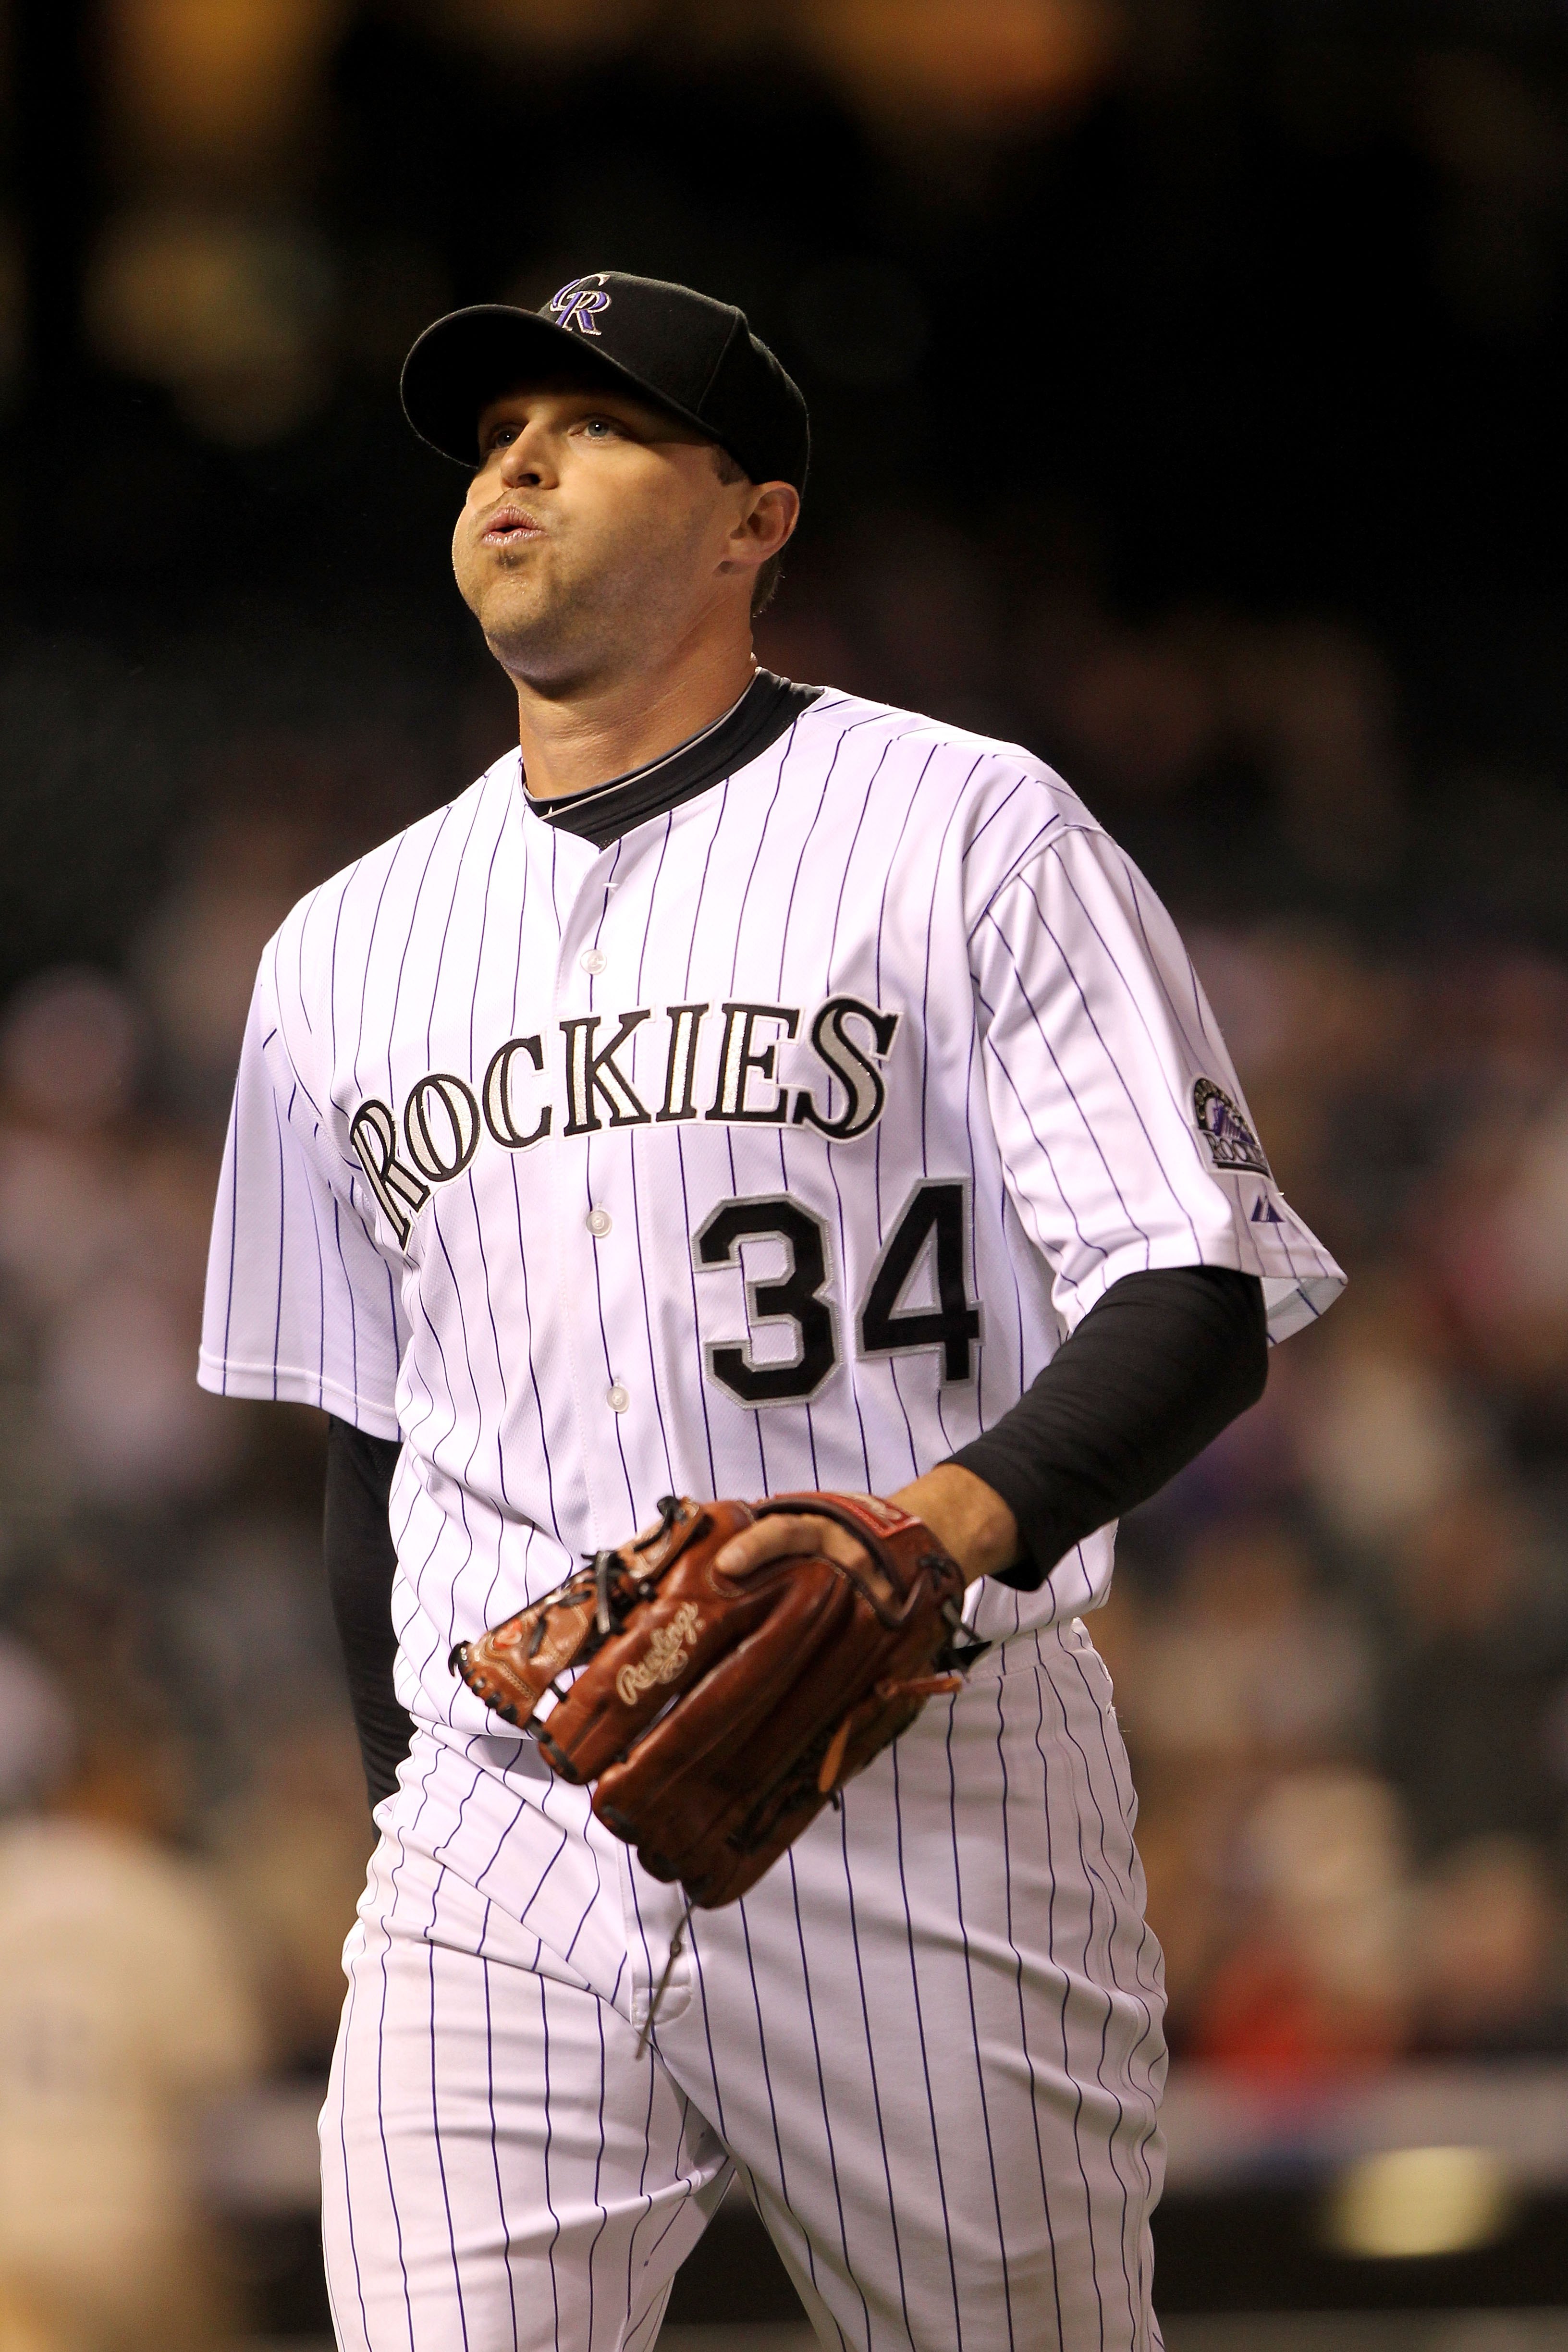 The Ideal Colorado Rockies roster in 2011